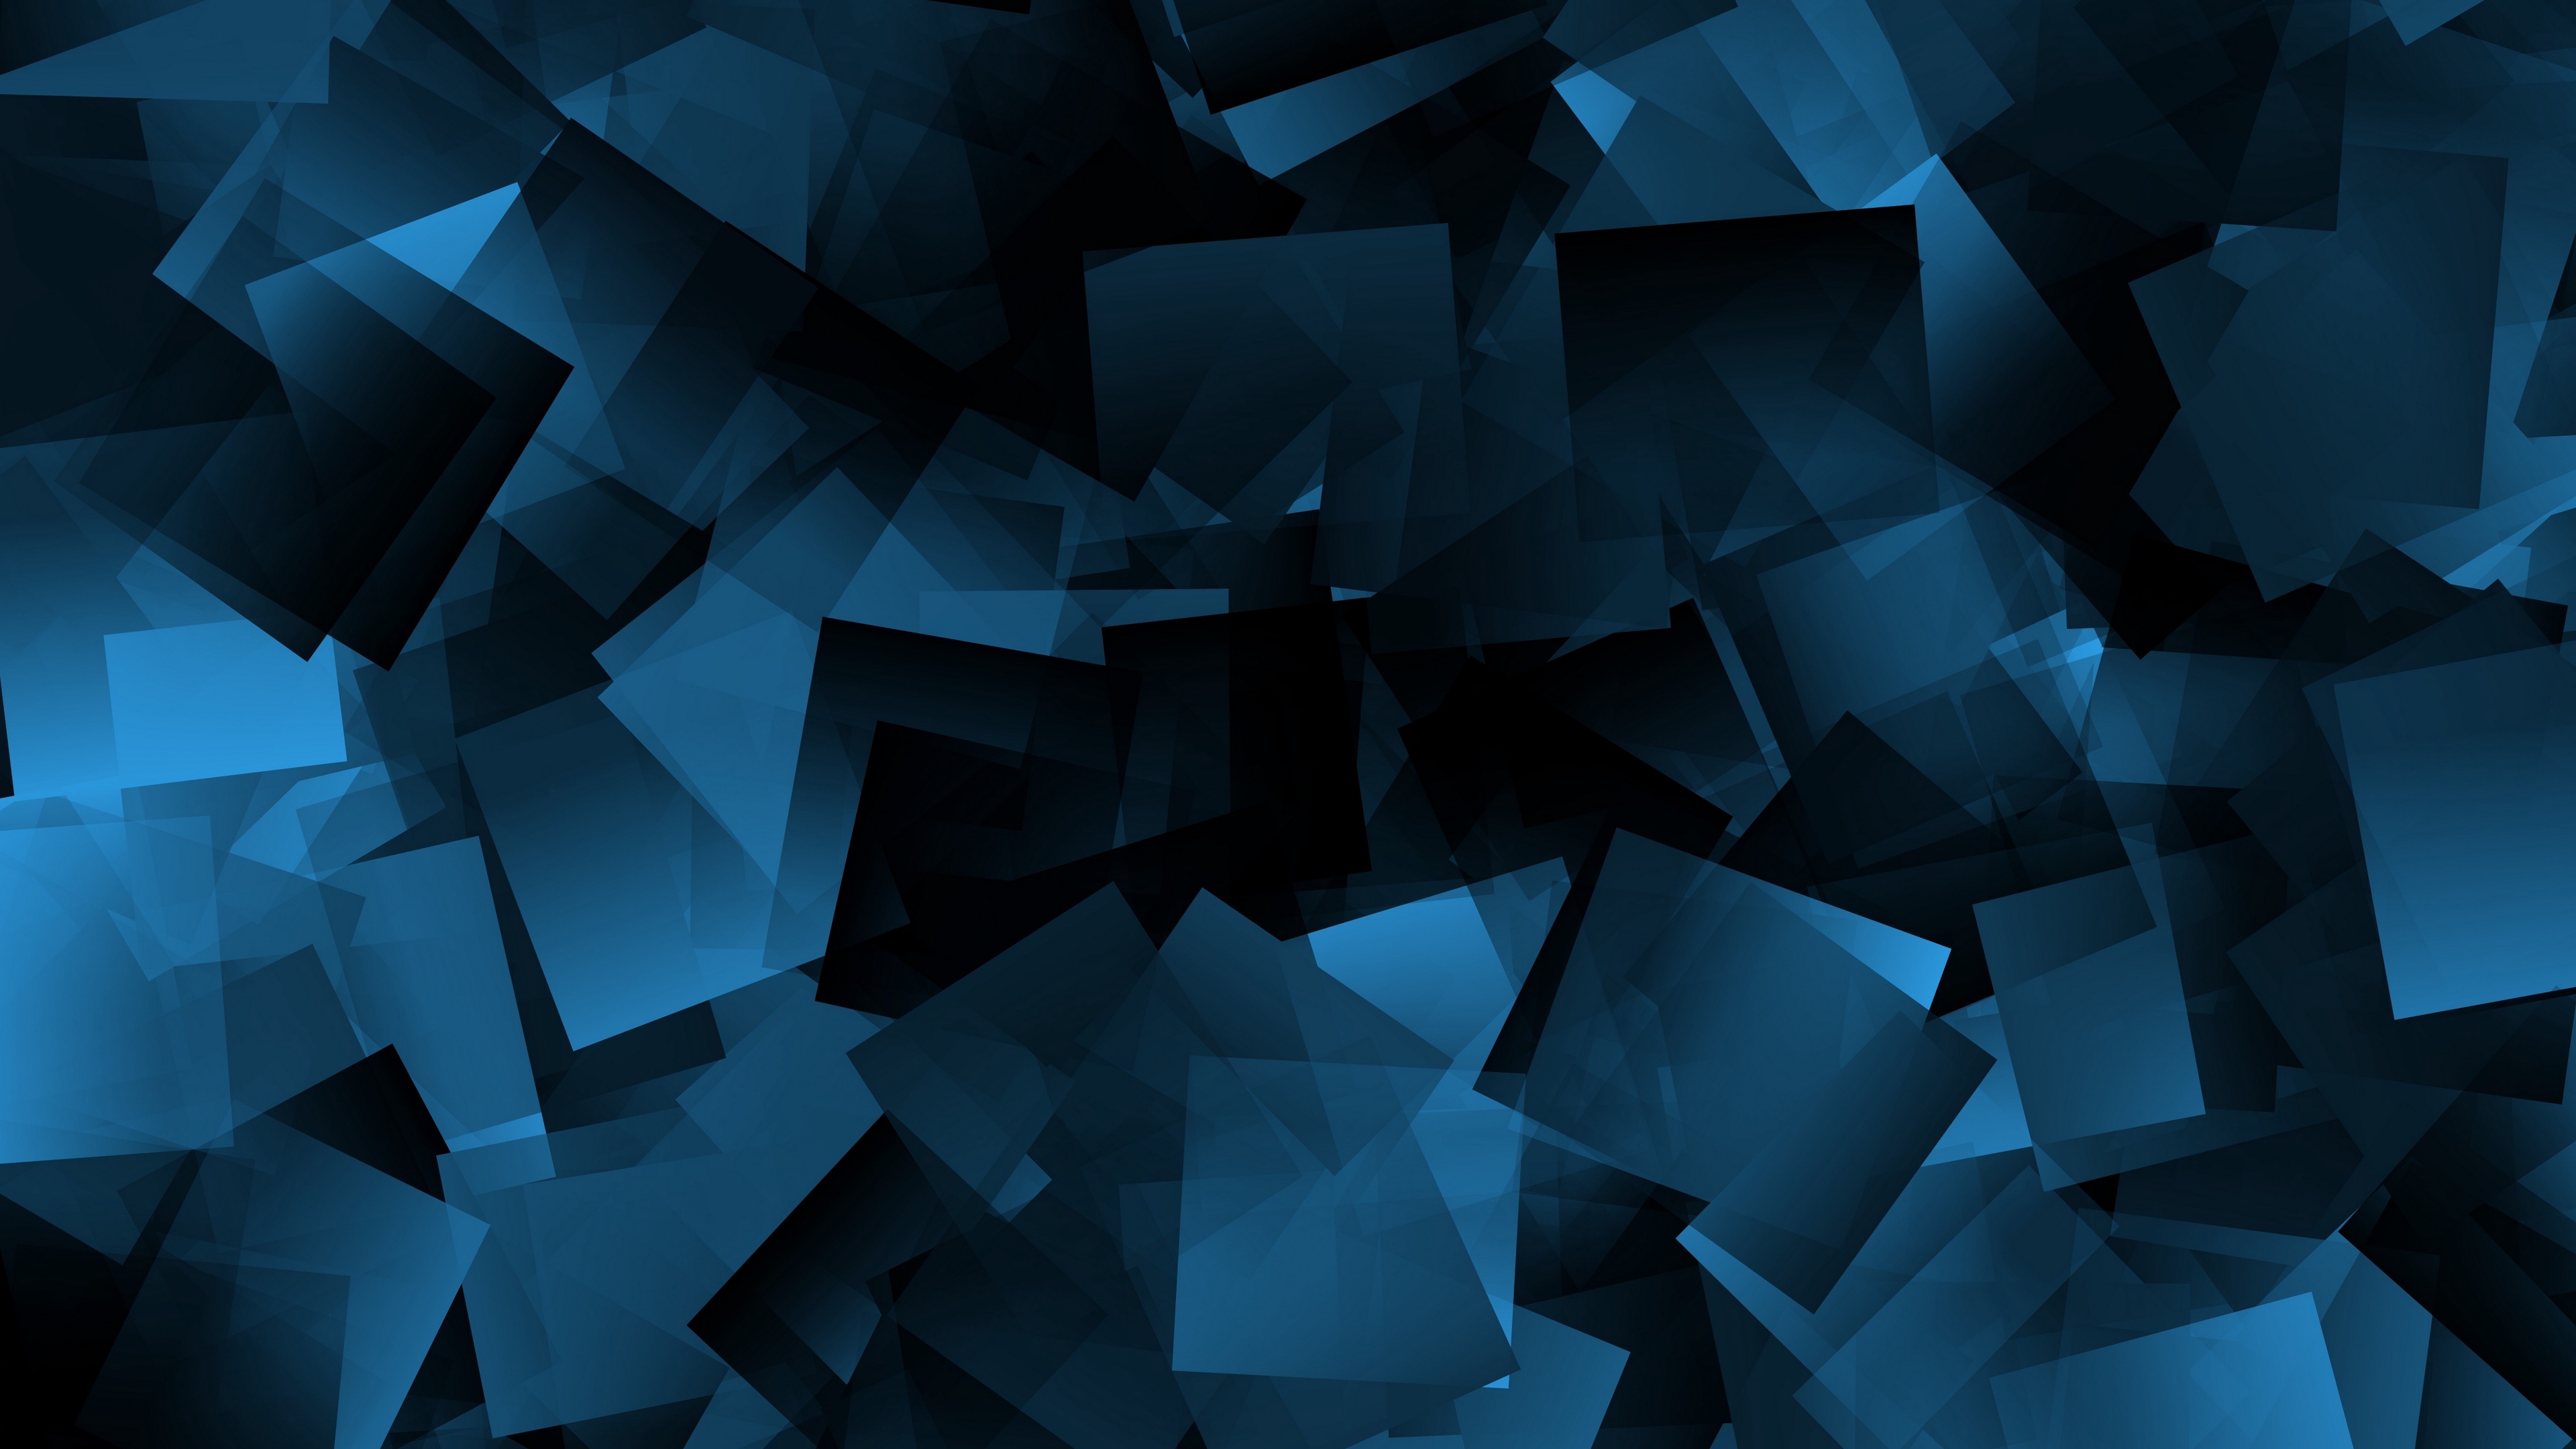 abstraction shapes dark background 4k 1539369935 - abstraction, shapes, dark background 4k - Shapes, dark background, Abstraction